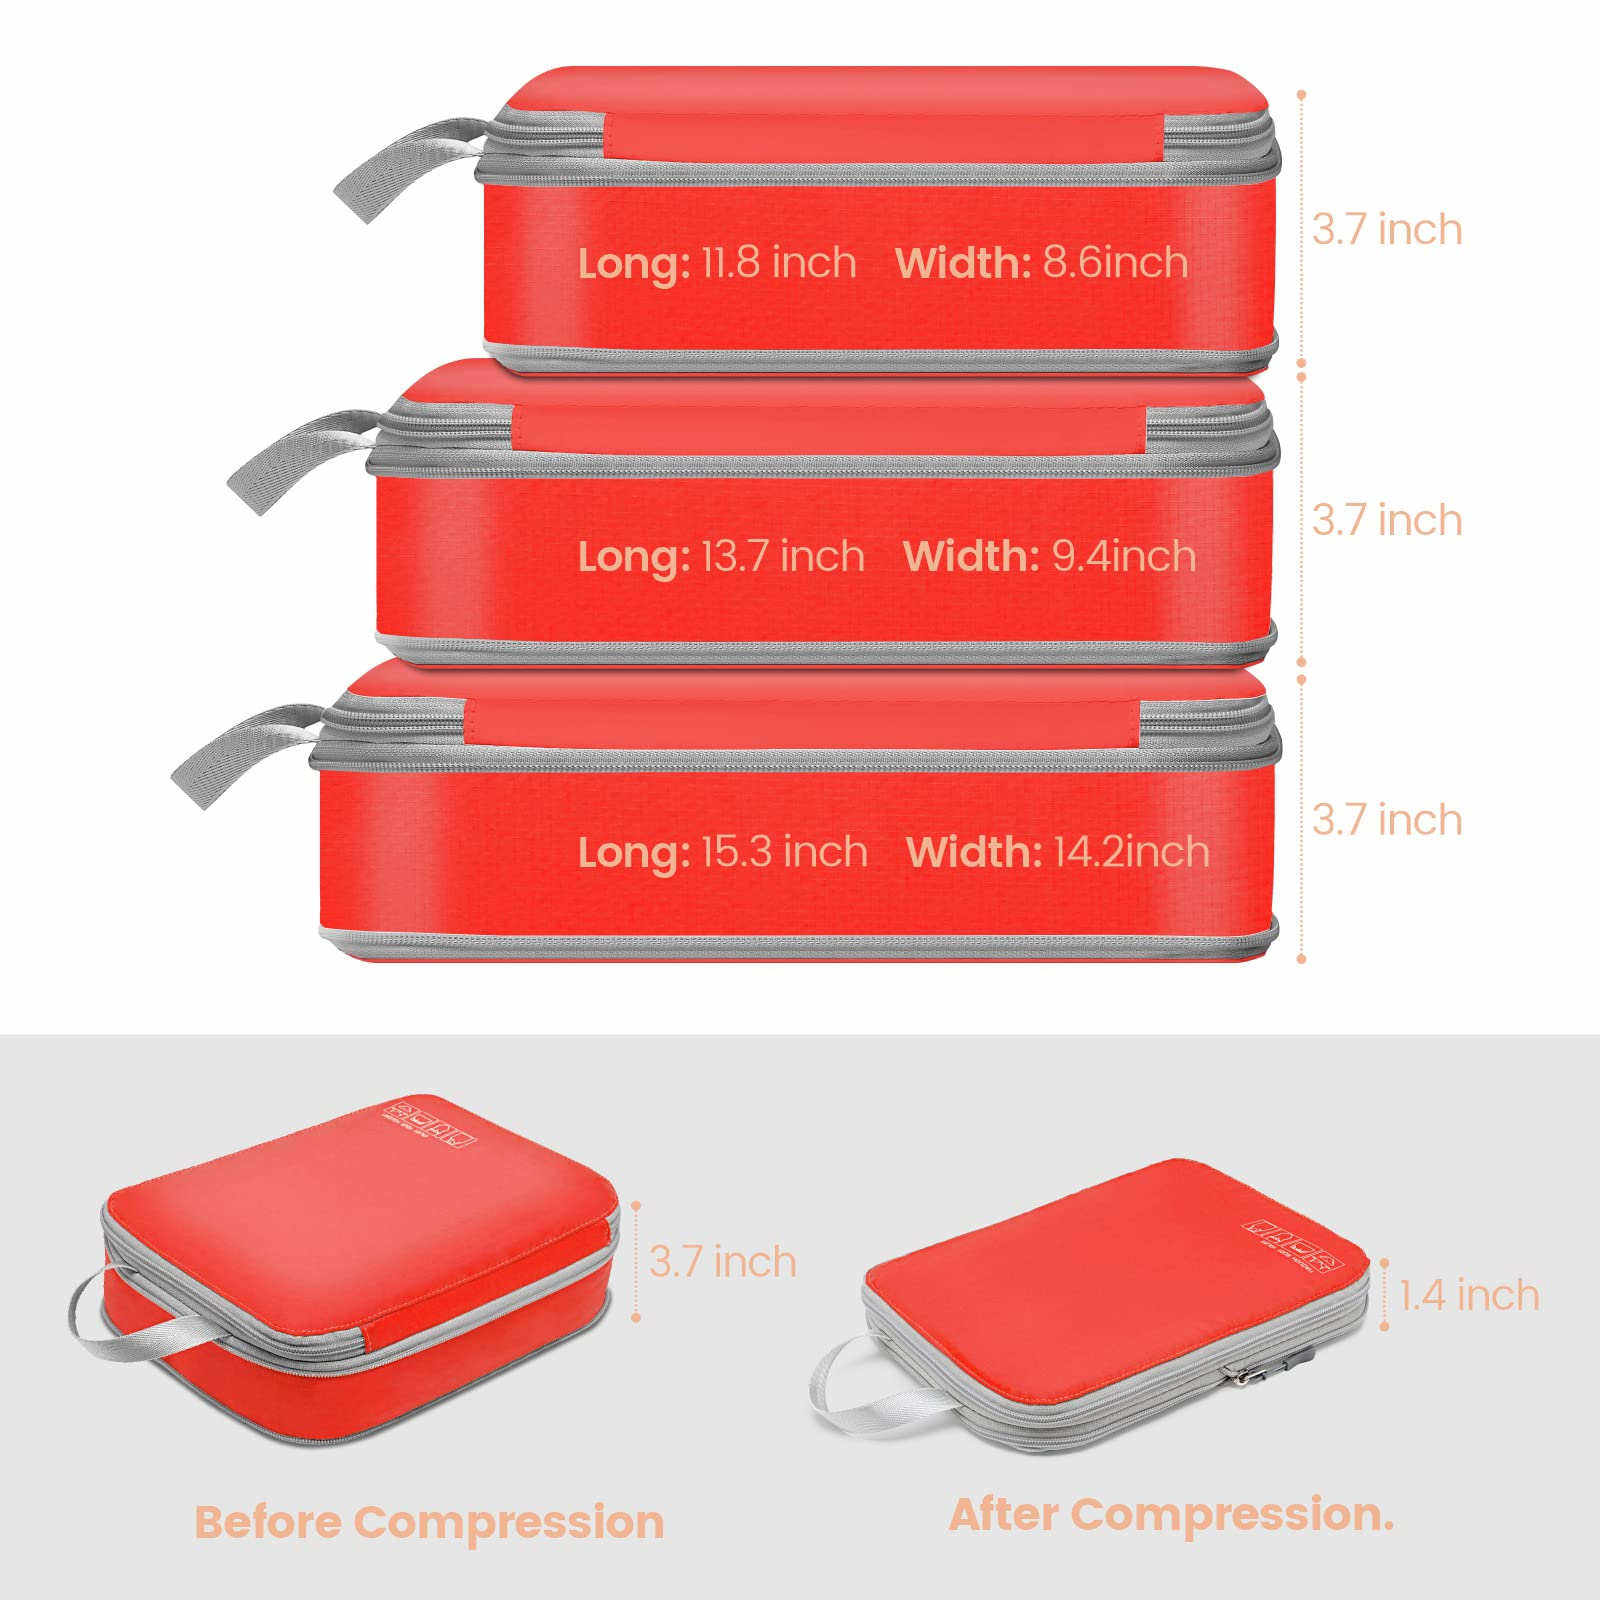 4 Pack Packing Cubes for Travel Product Details